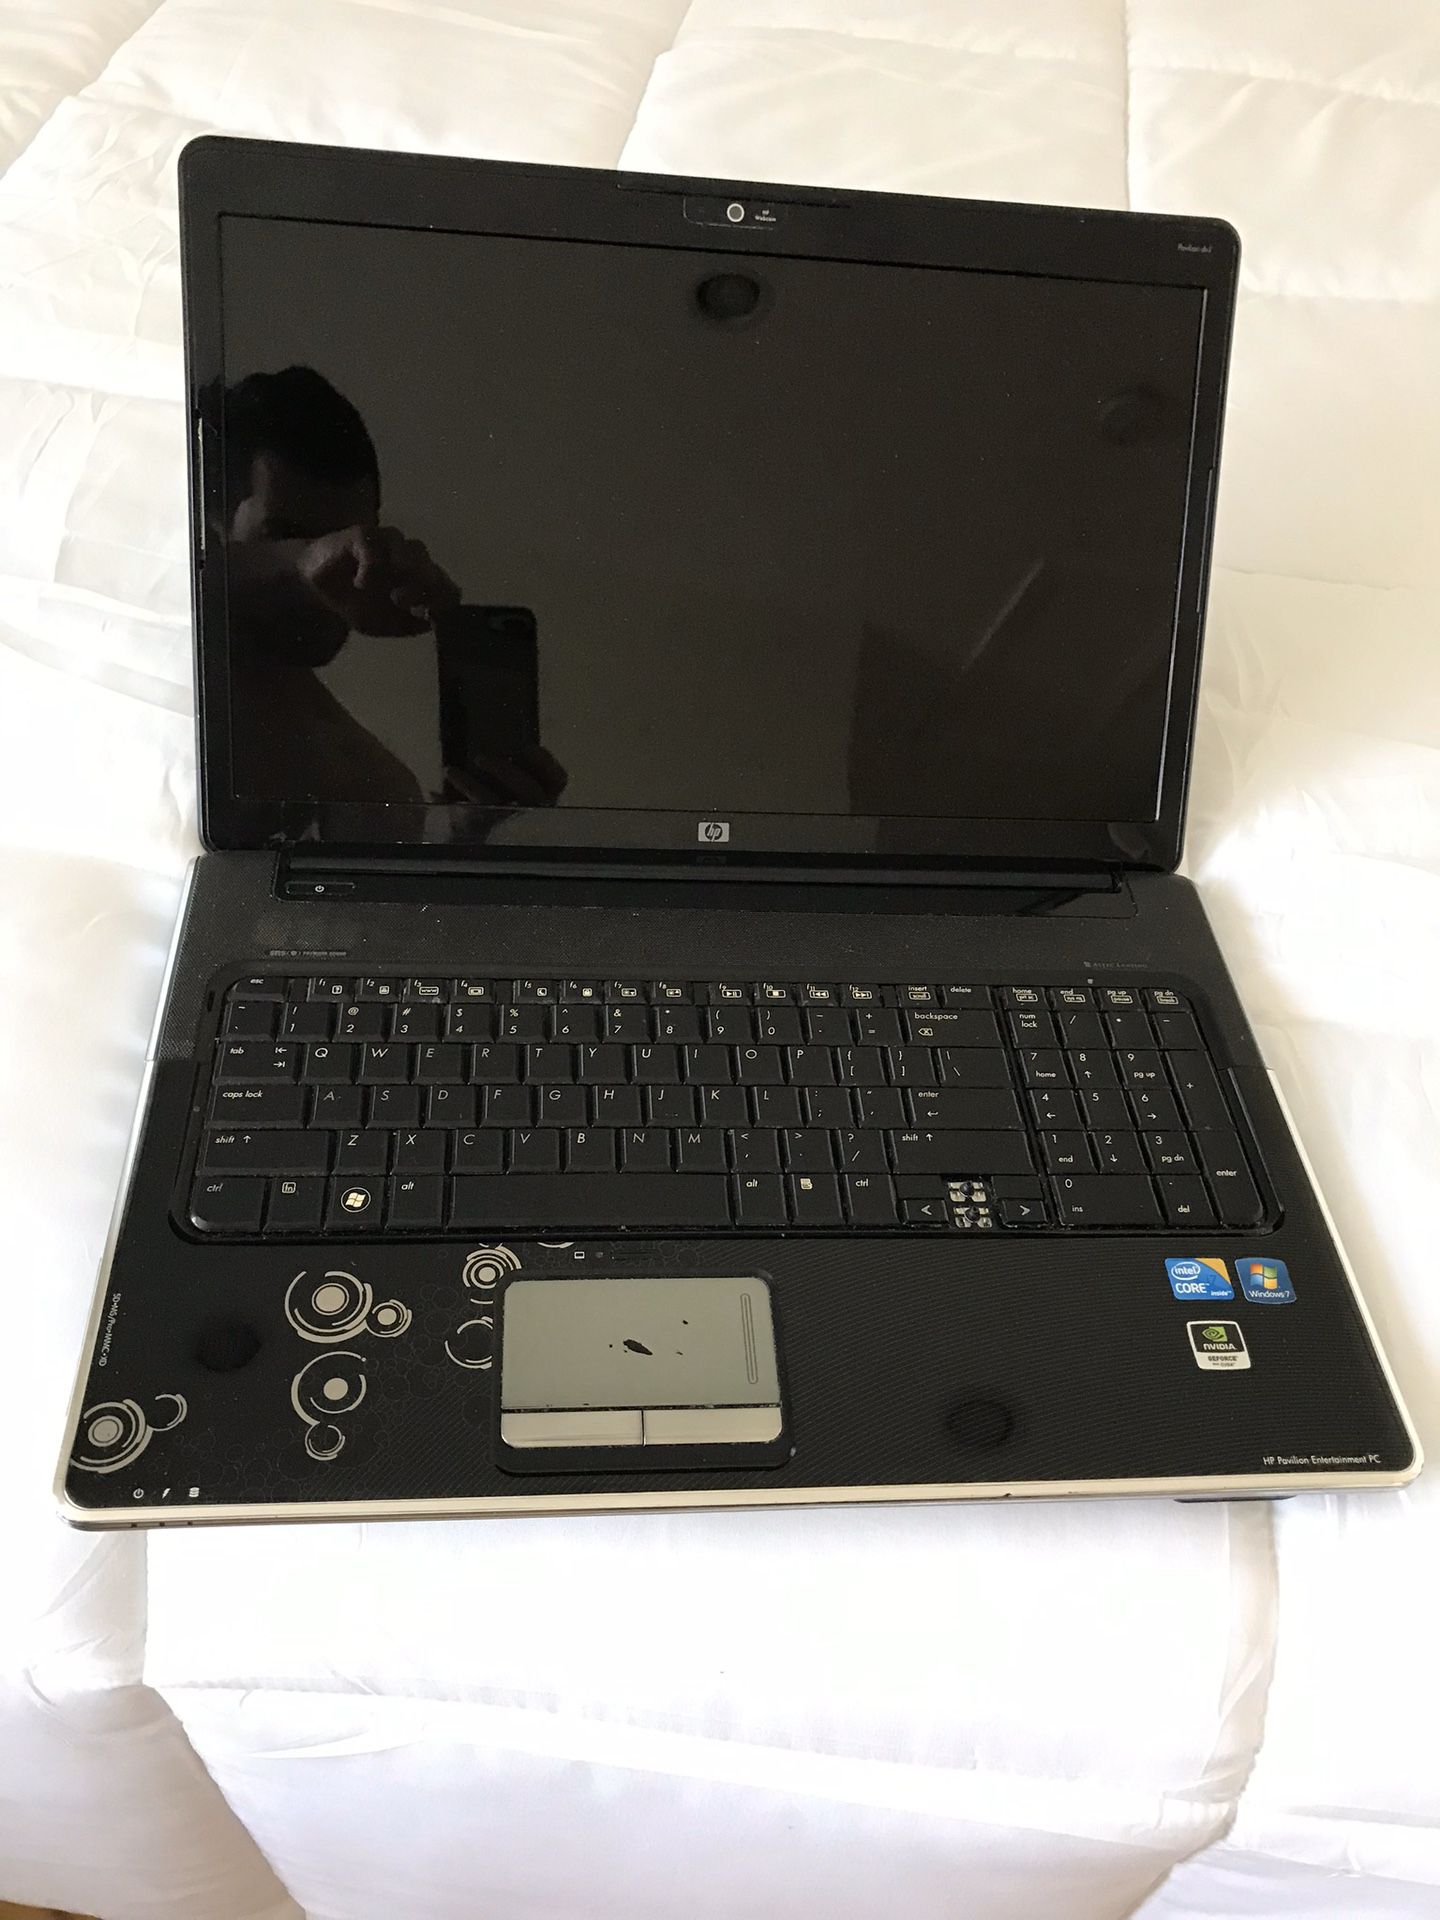 HP Pavilion DV7t laptop 500gb with Blu-ray core i7 with brand new battery